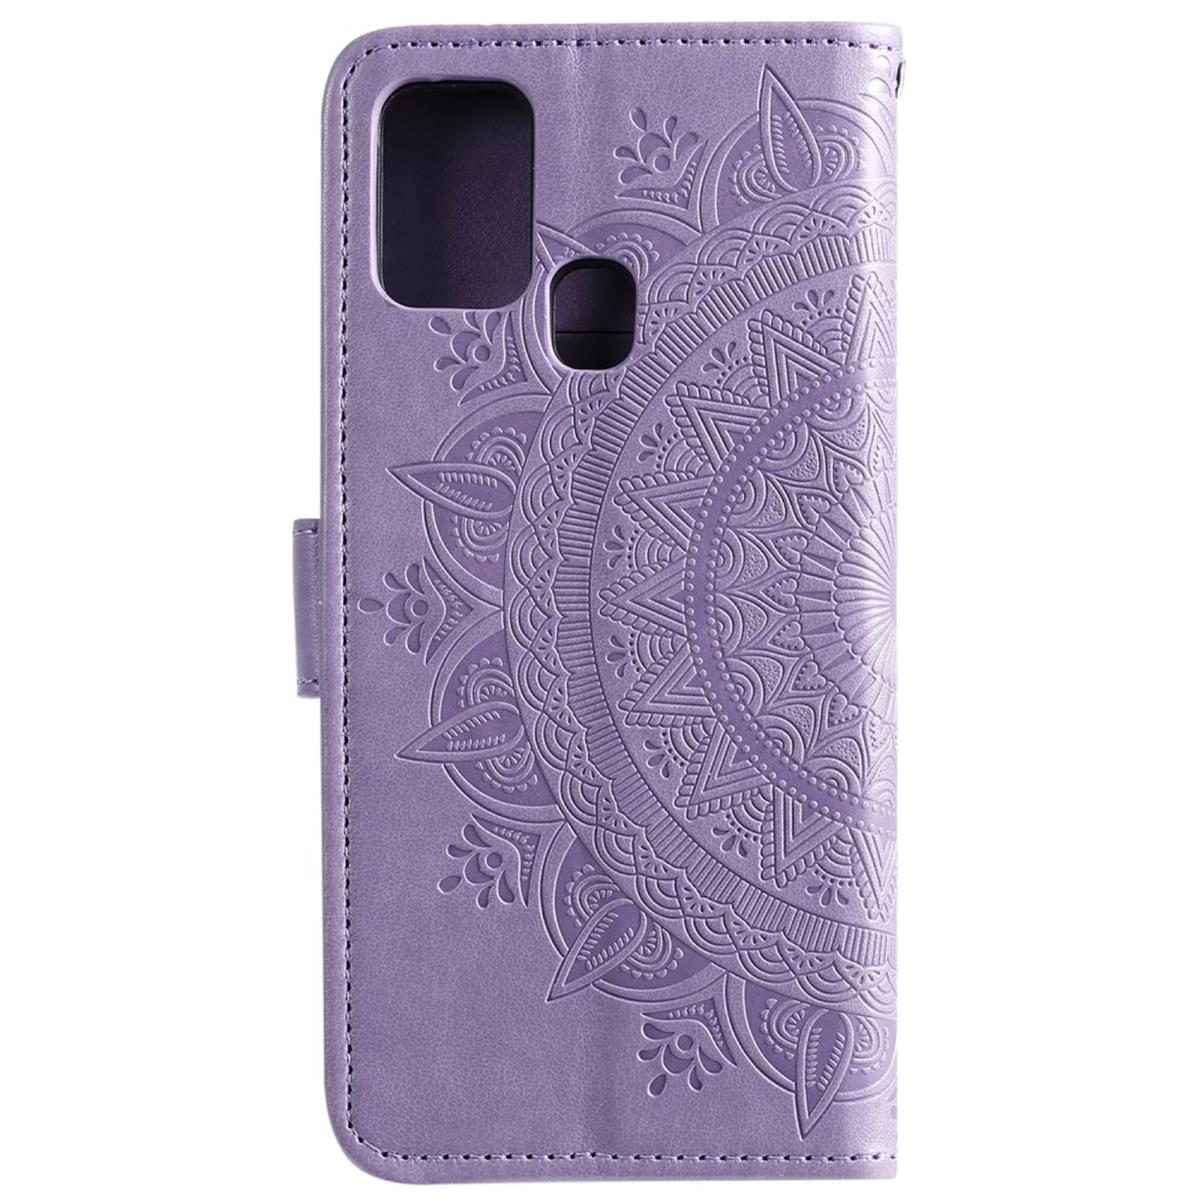 Y6p, Huawei, COVERKINGZ mit Lila Mandala Muster, Bookcover, Klapphülle